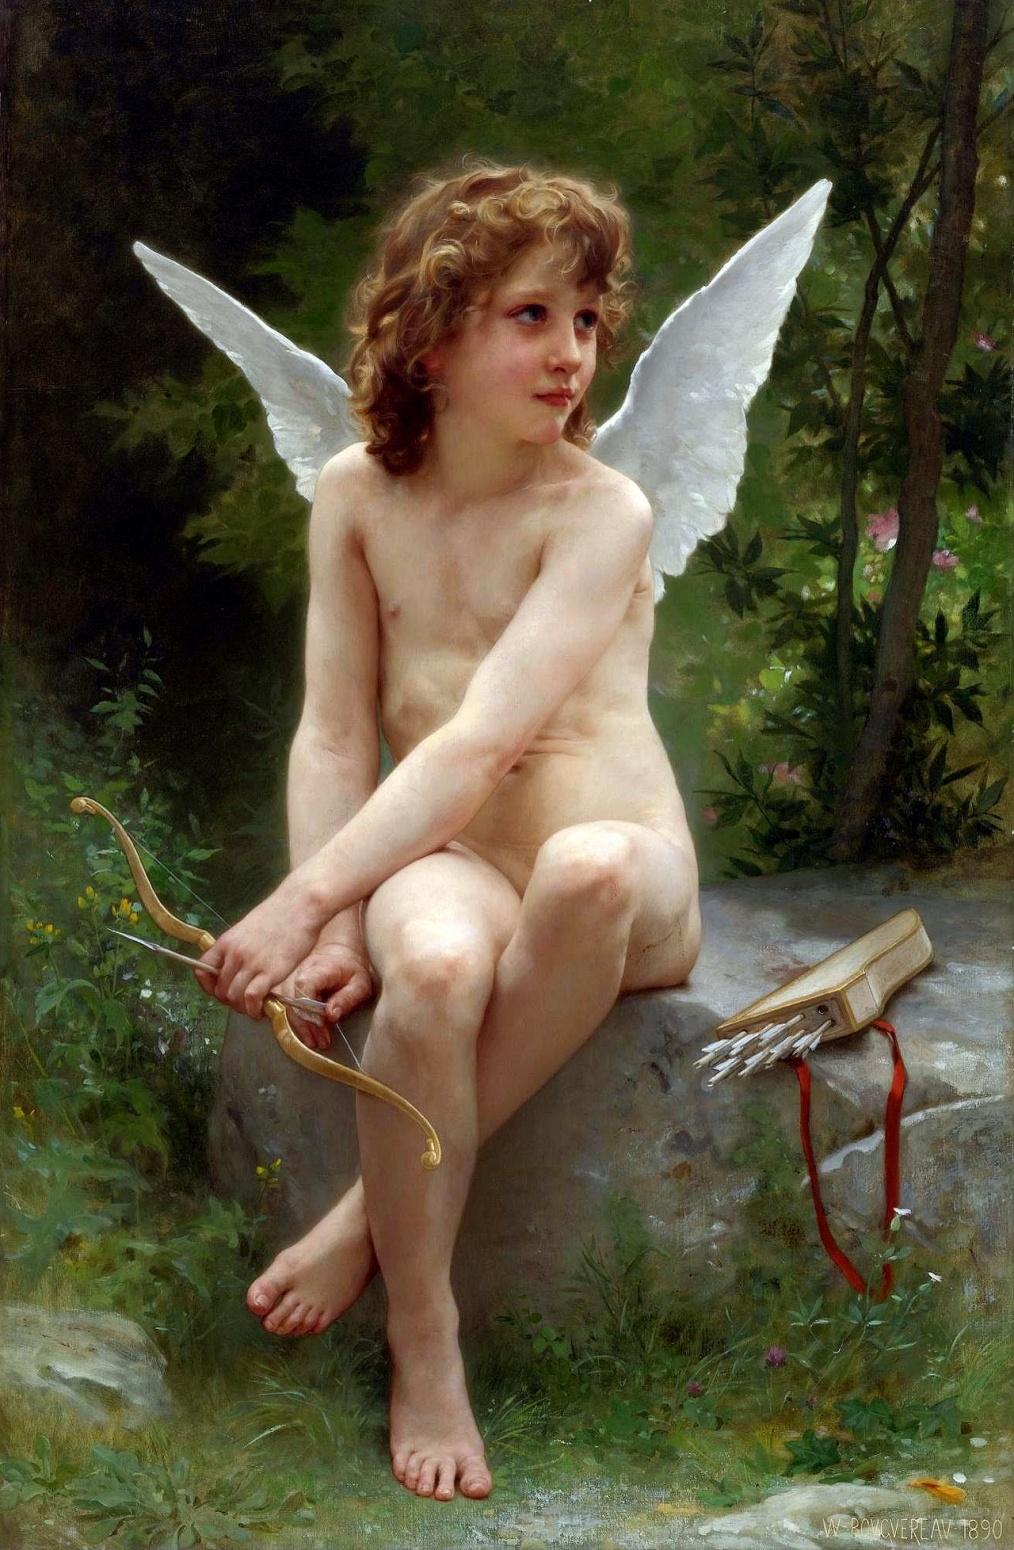 https://upload.wikimedia.org/wikipedia/commons/5/54/William-Adolphe_Bouguereau_%281825-1905%29_-_Love_on_the_Look_Out_%281890%29.jpg